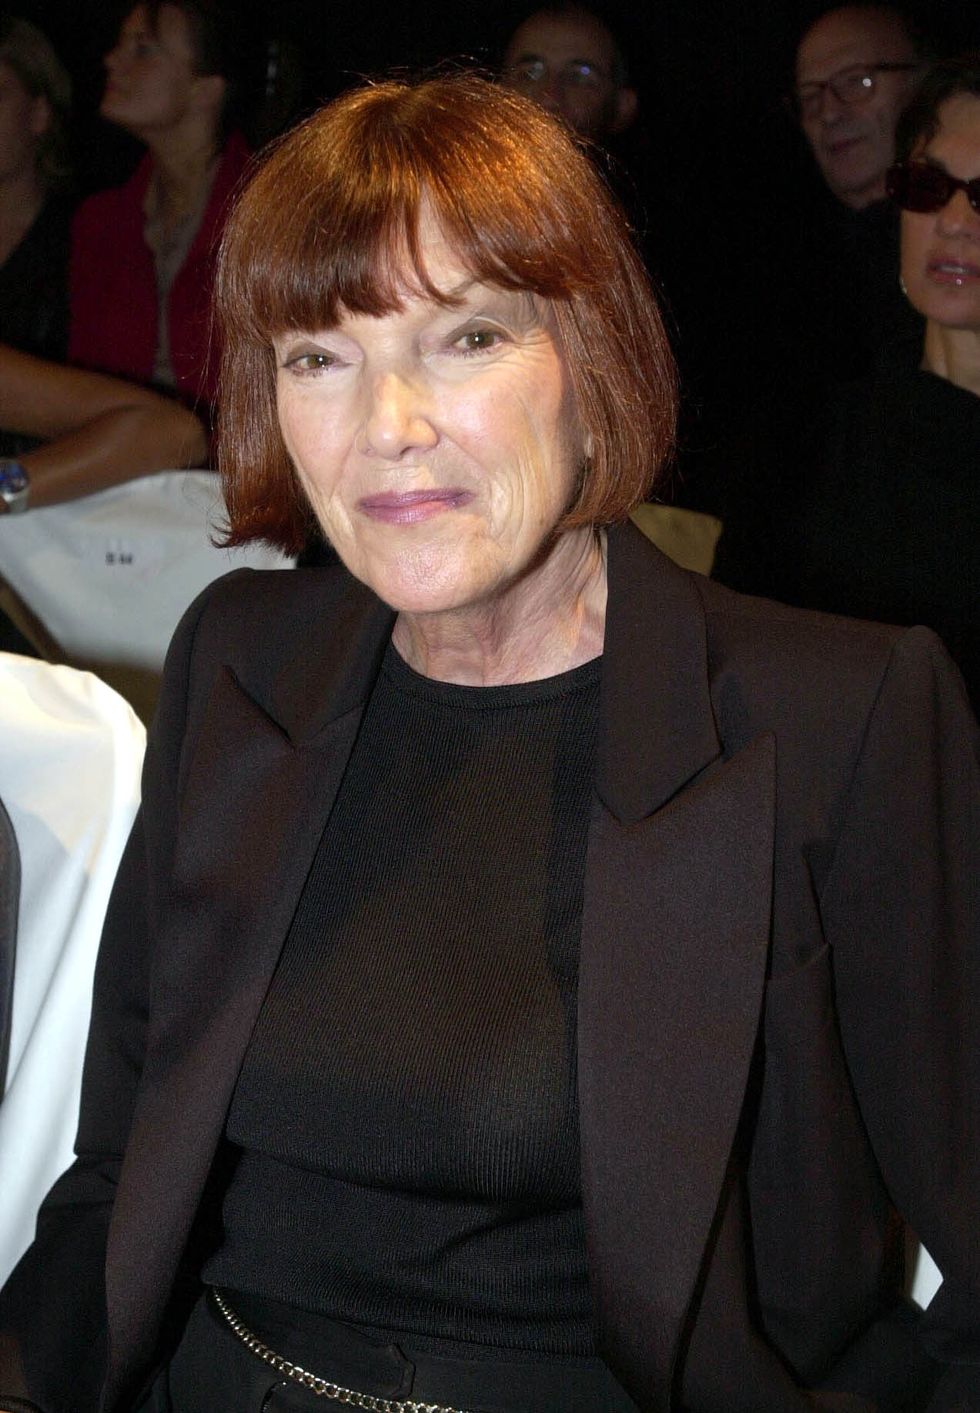 fashion designer mary quant attending london fashion week springsummer 2000, at the natural history museum in london   photo by fiona hanson   pa imagespa images via getty images